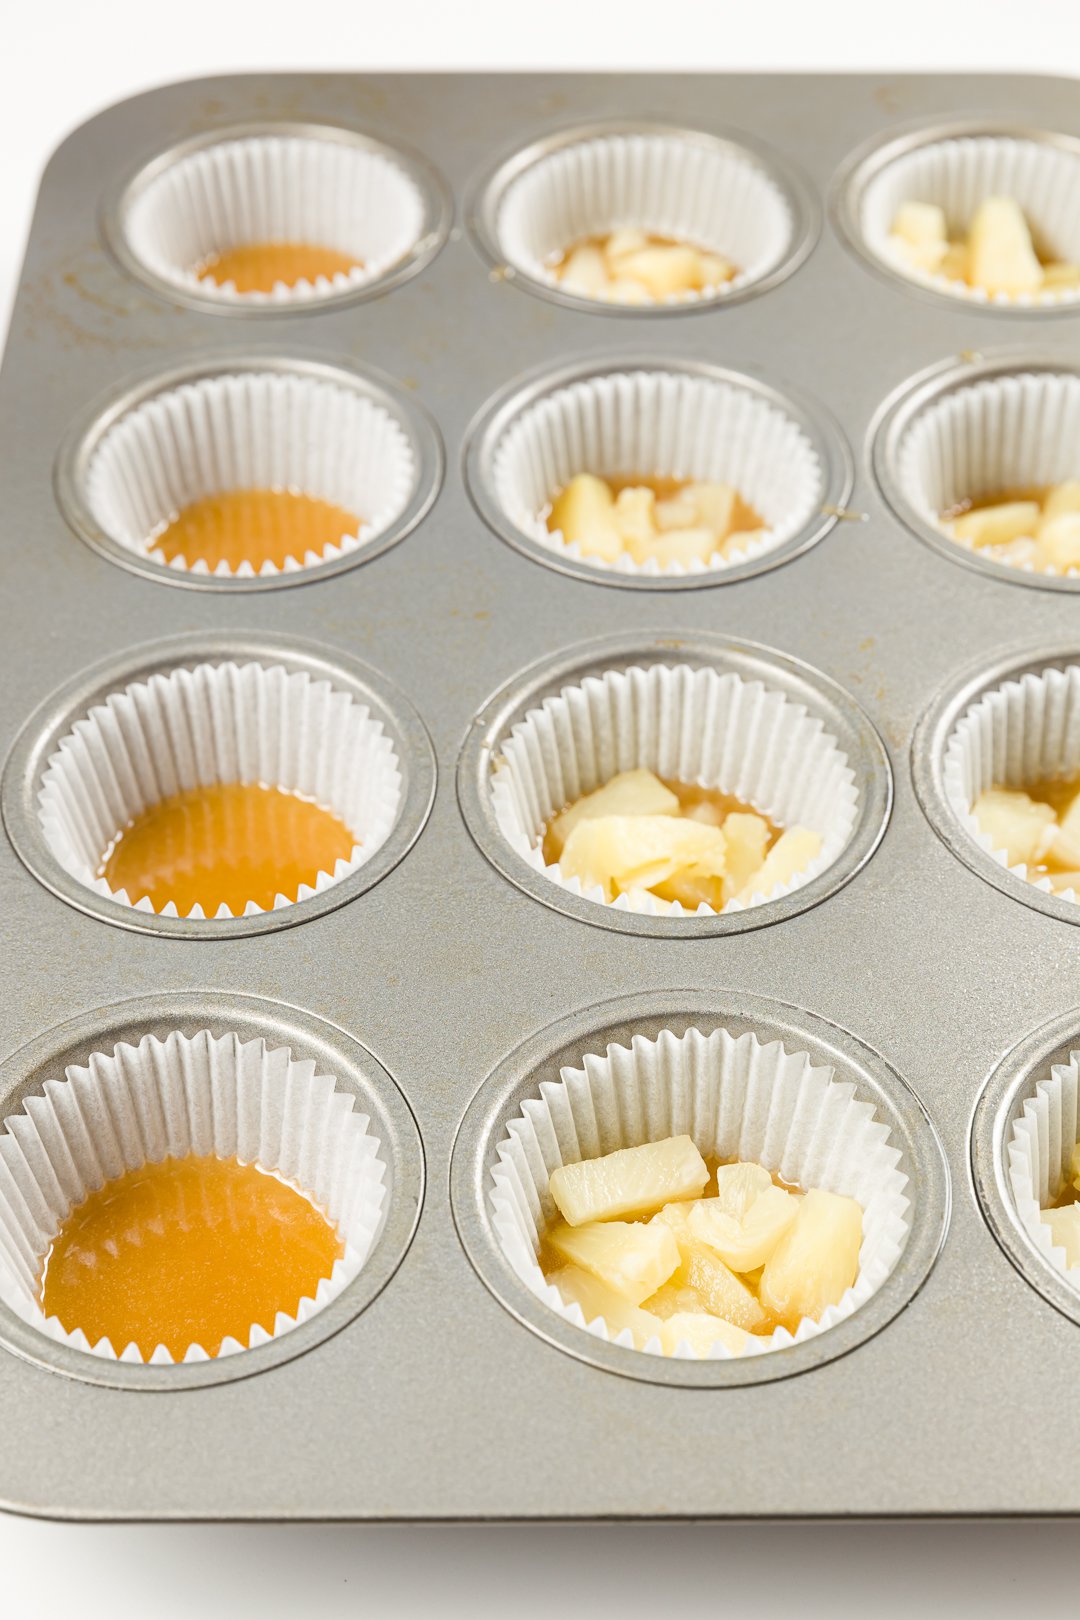 Adding pineapple to cupcake liners